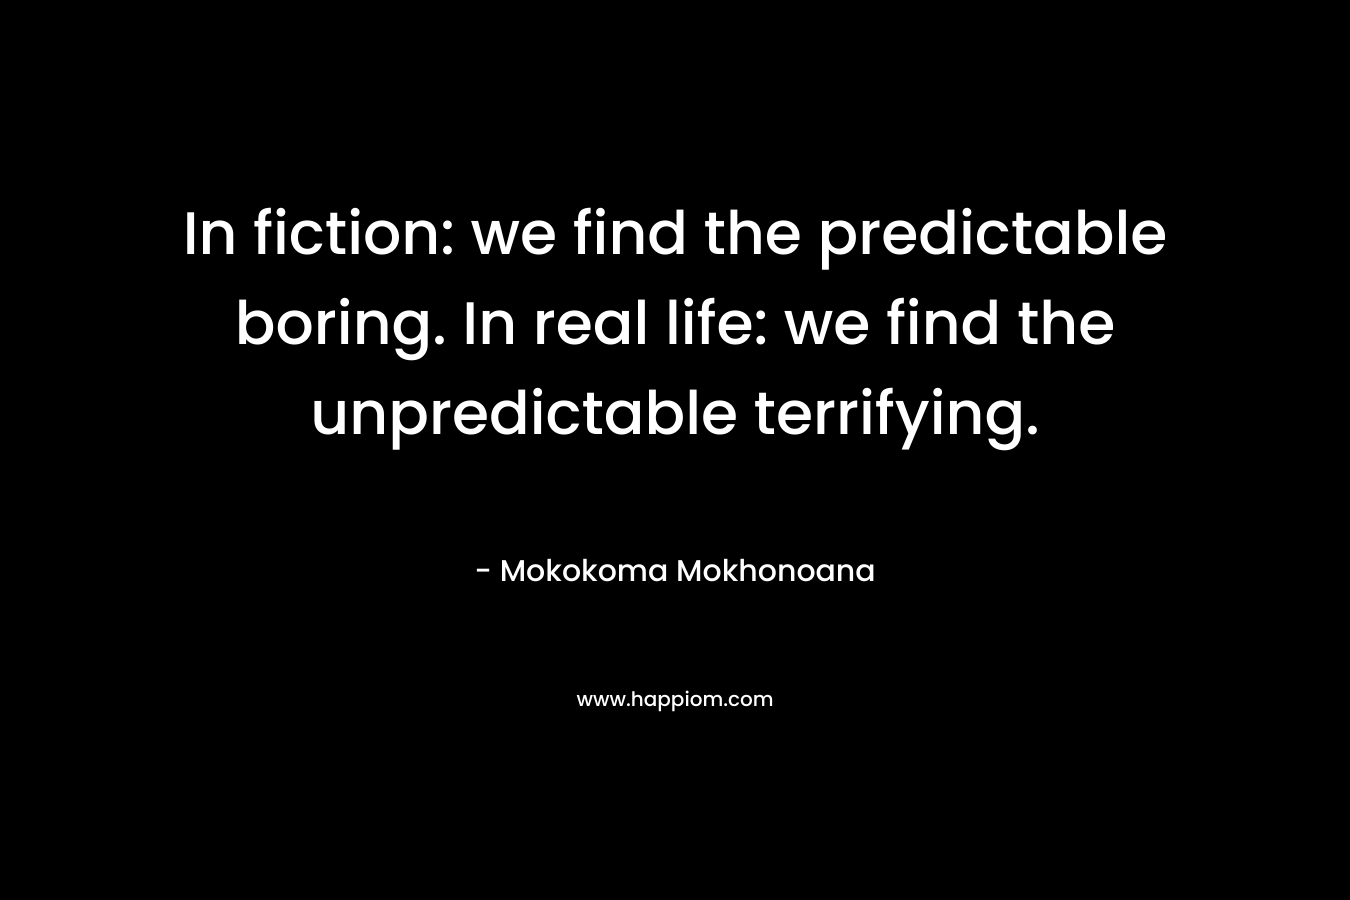 In fiction: we find the predictable boring. In real life: we find the unpredictable terrifying. – Mokokoma Mokhonoana